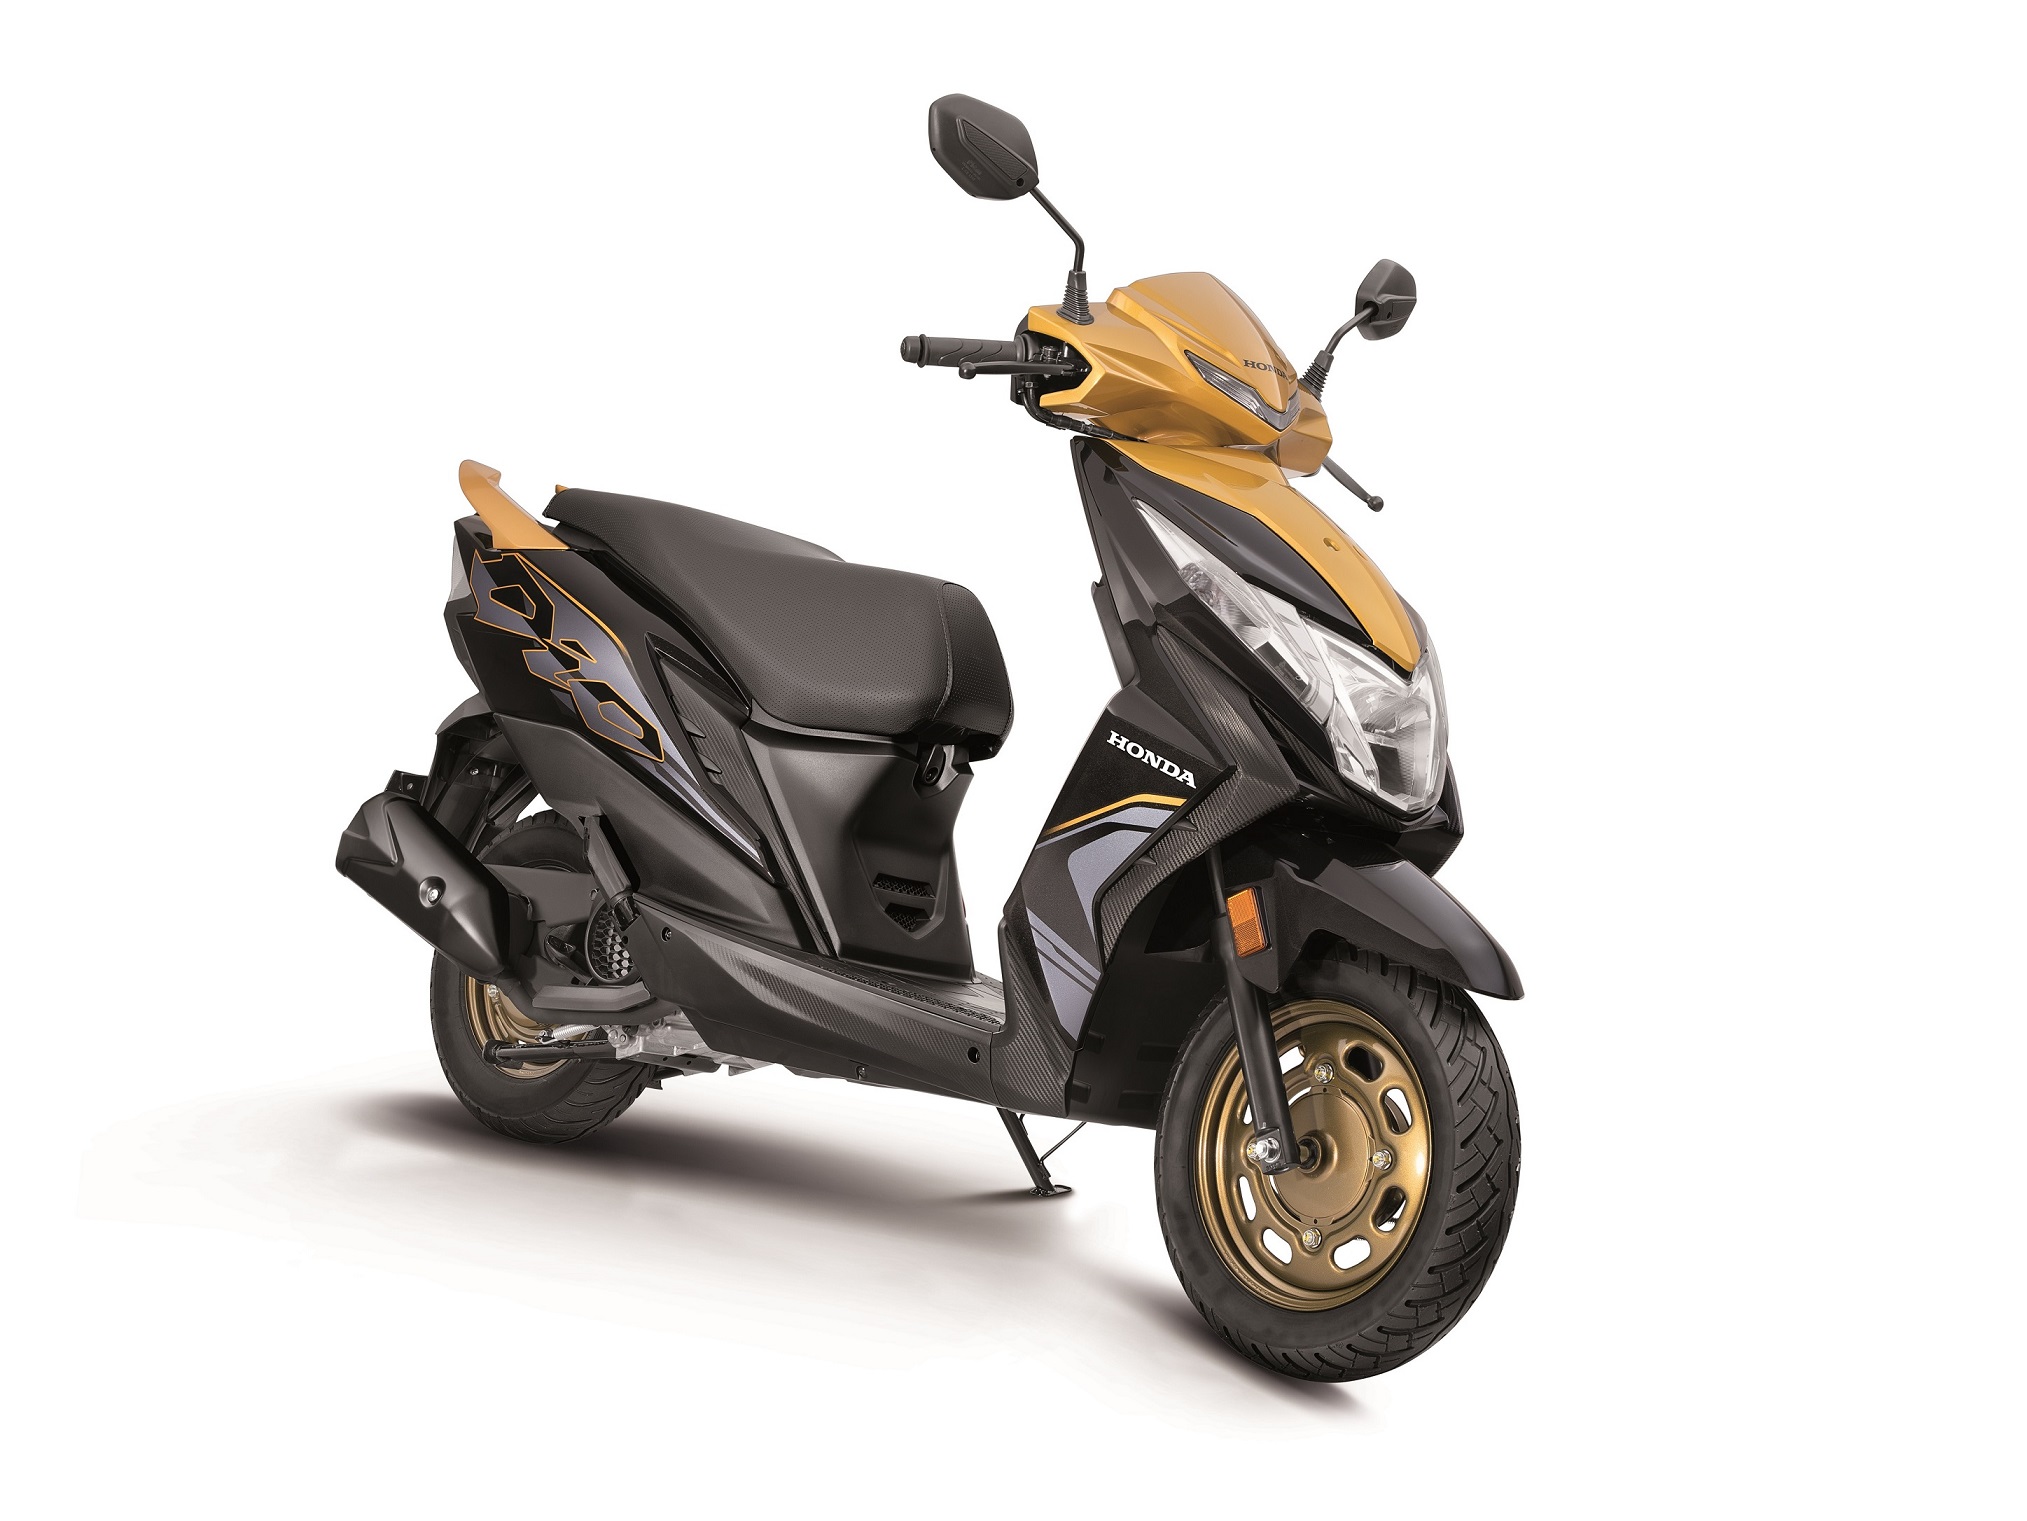 2023 Honda Dio HSmart Launched With Many Updates